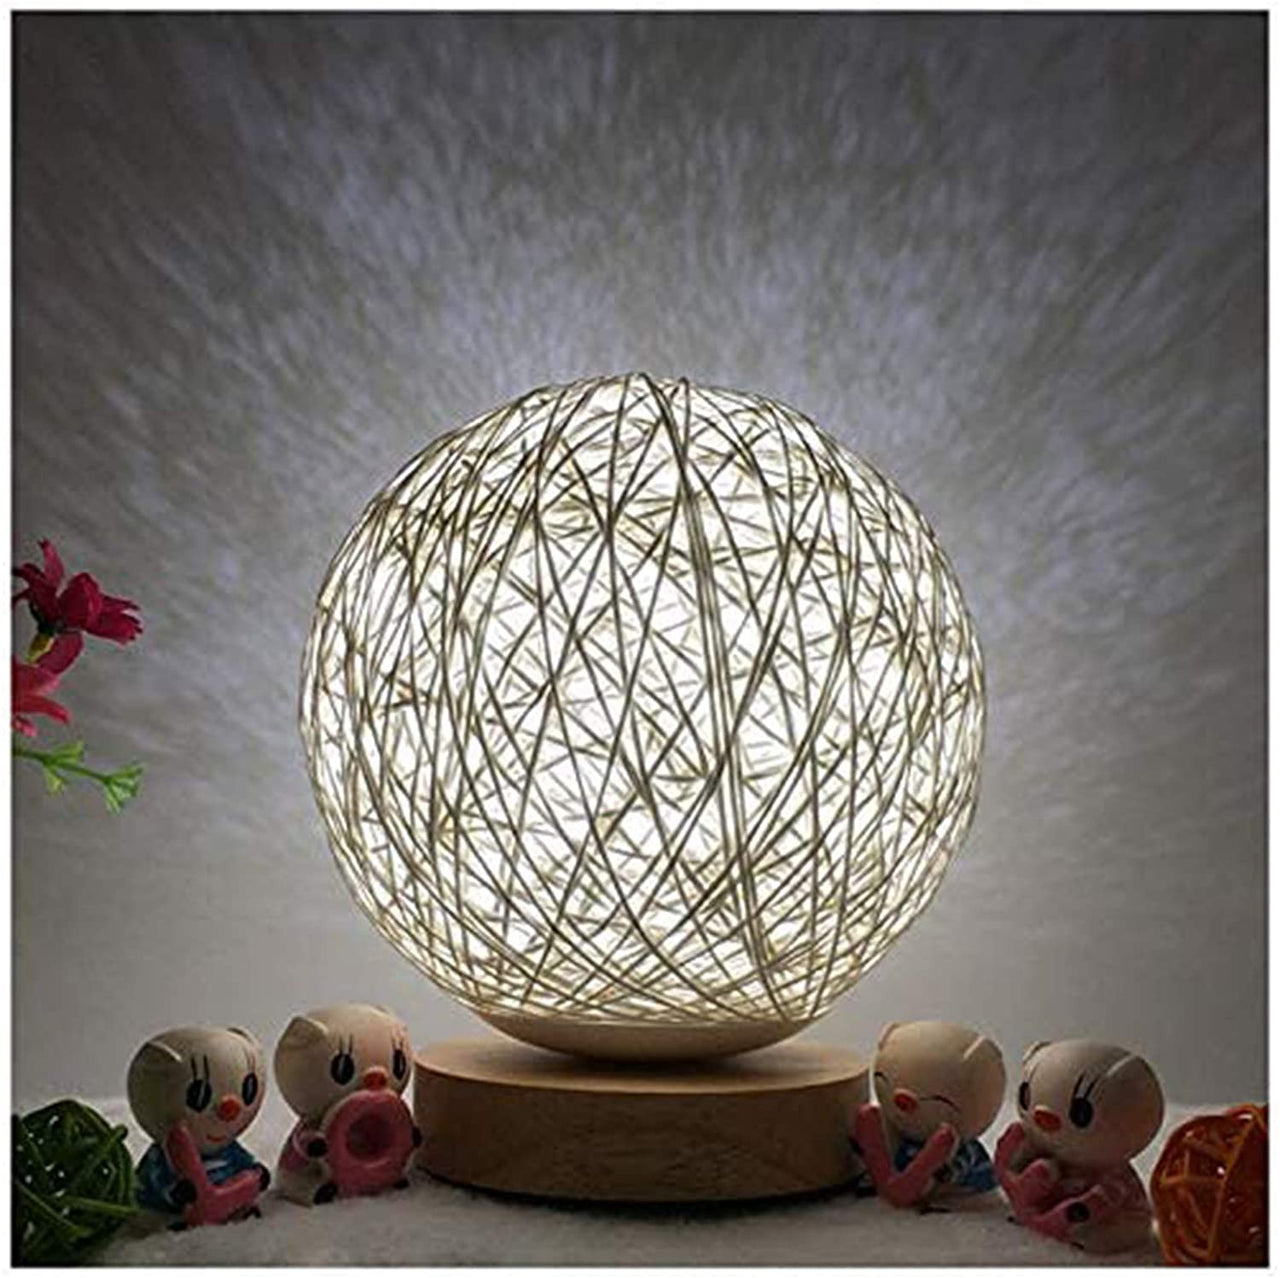 Wooden Moon Lamp - USB Charger - Bedside Table Decor